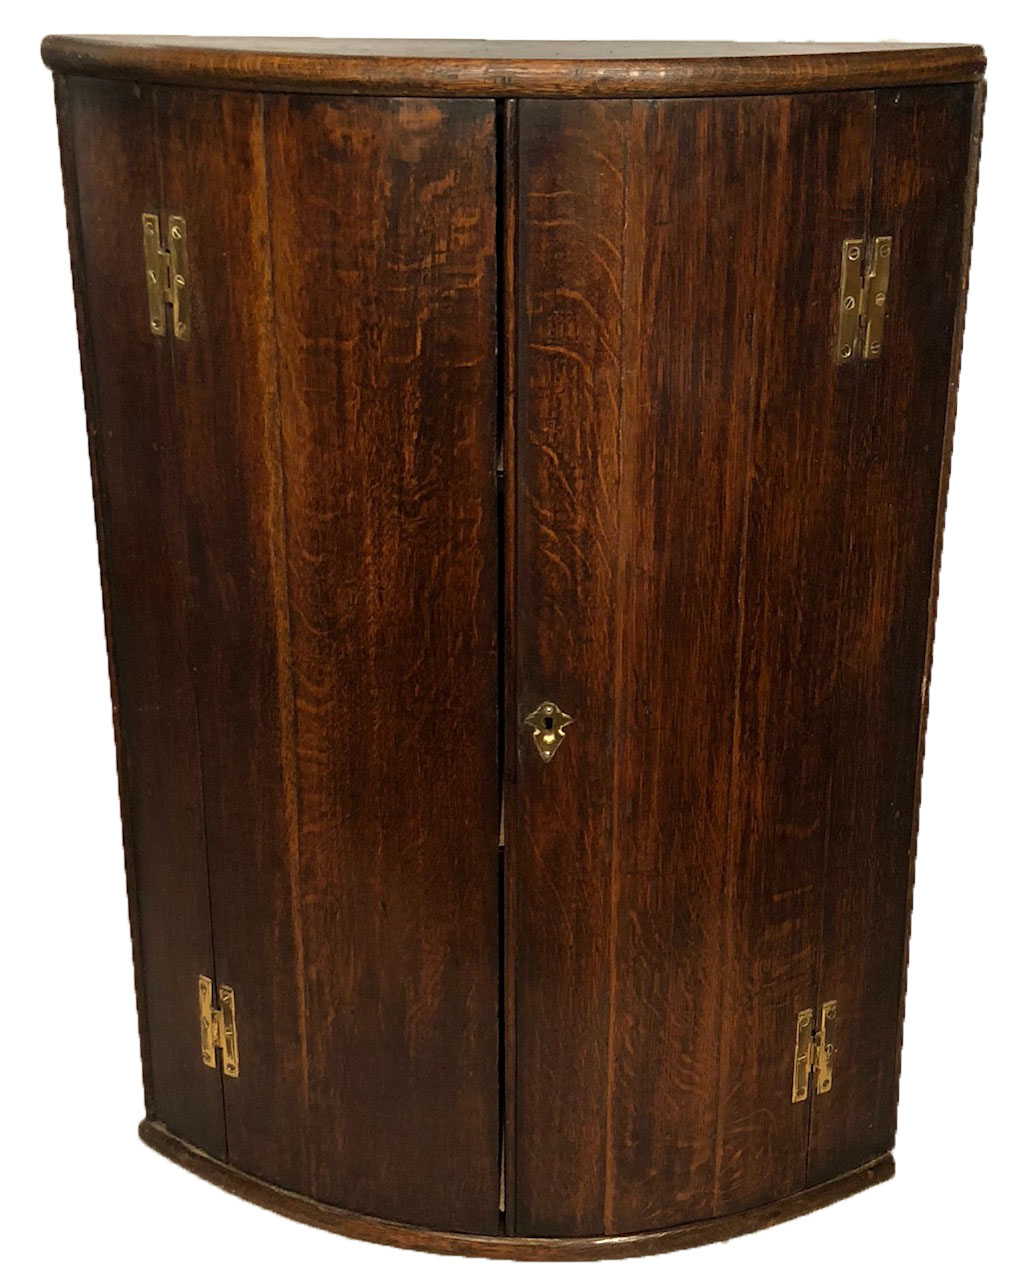 A GEORGIAN OAK HANGING CORNER CABINET With brass fittings and shelved interior. (h 84.5 x d 60cm)